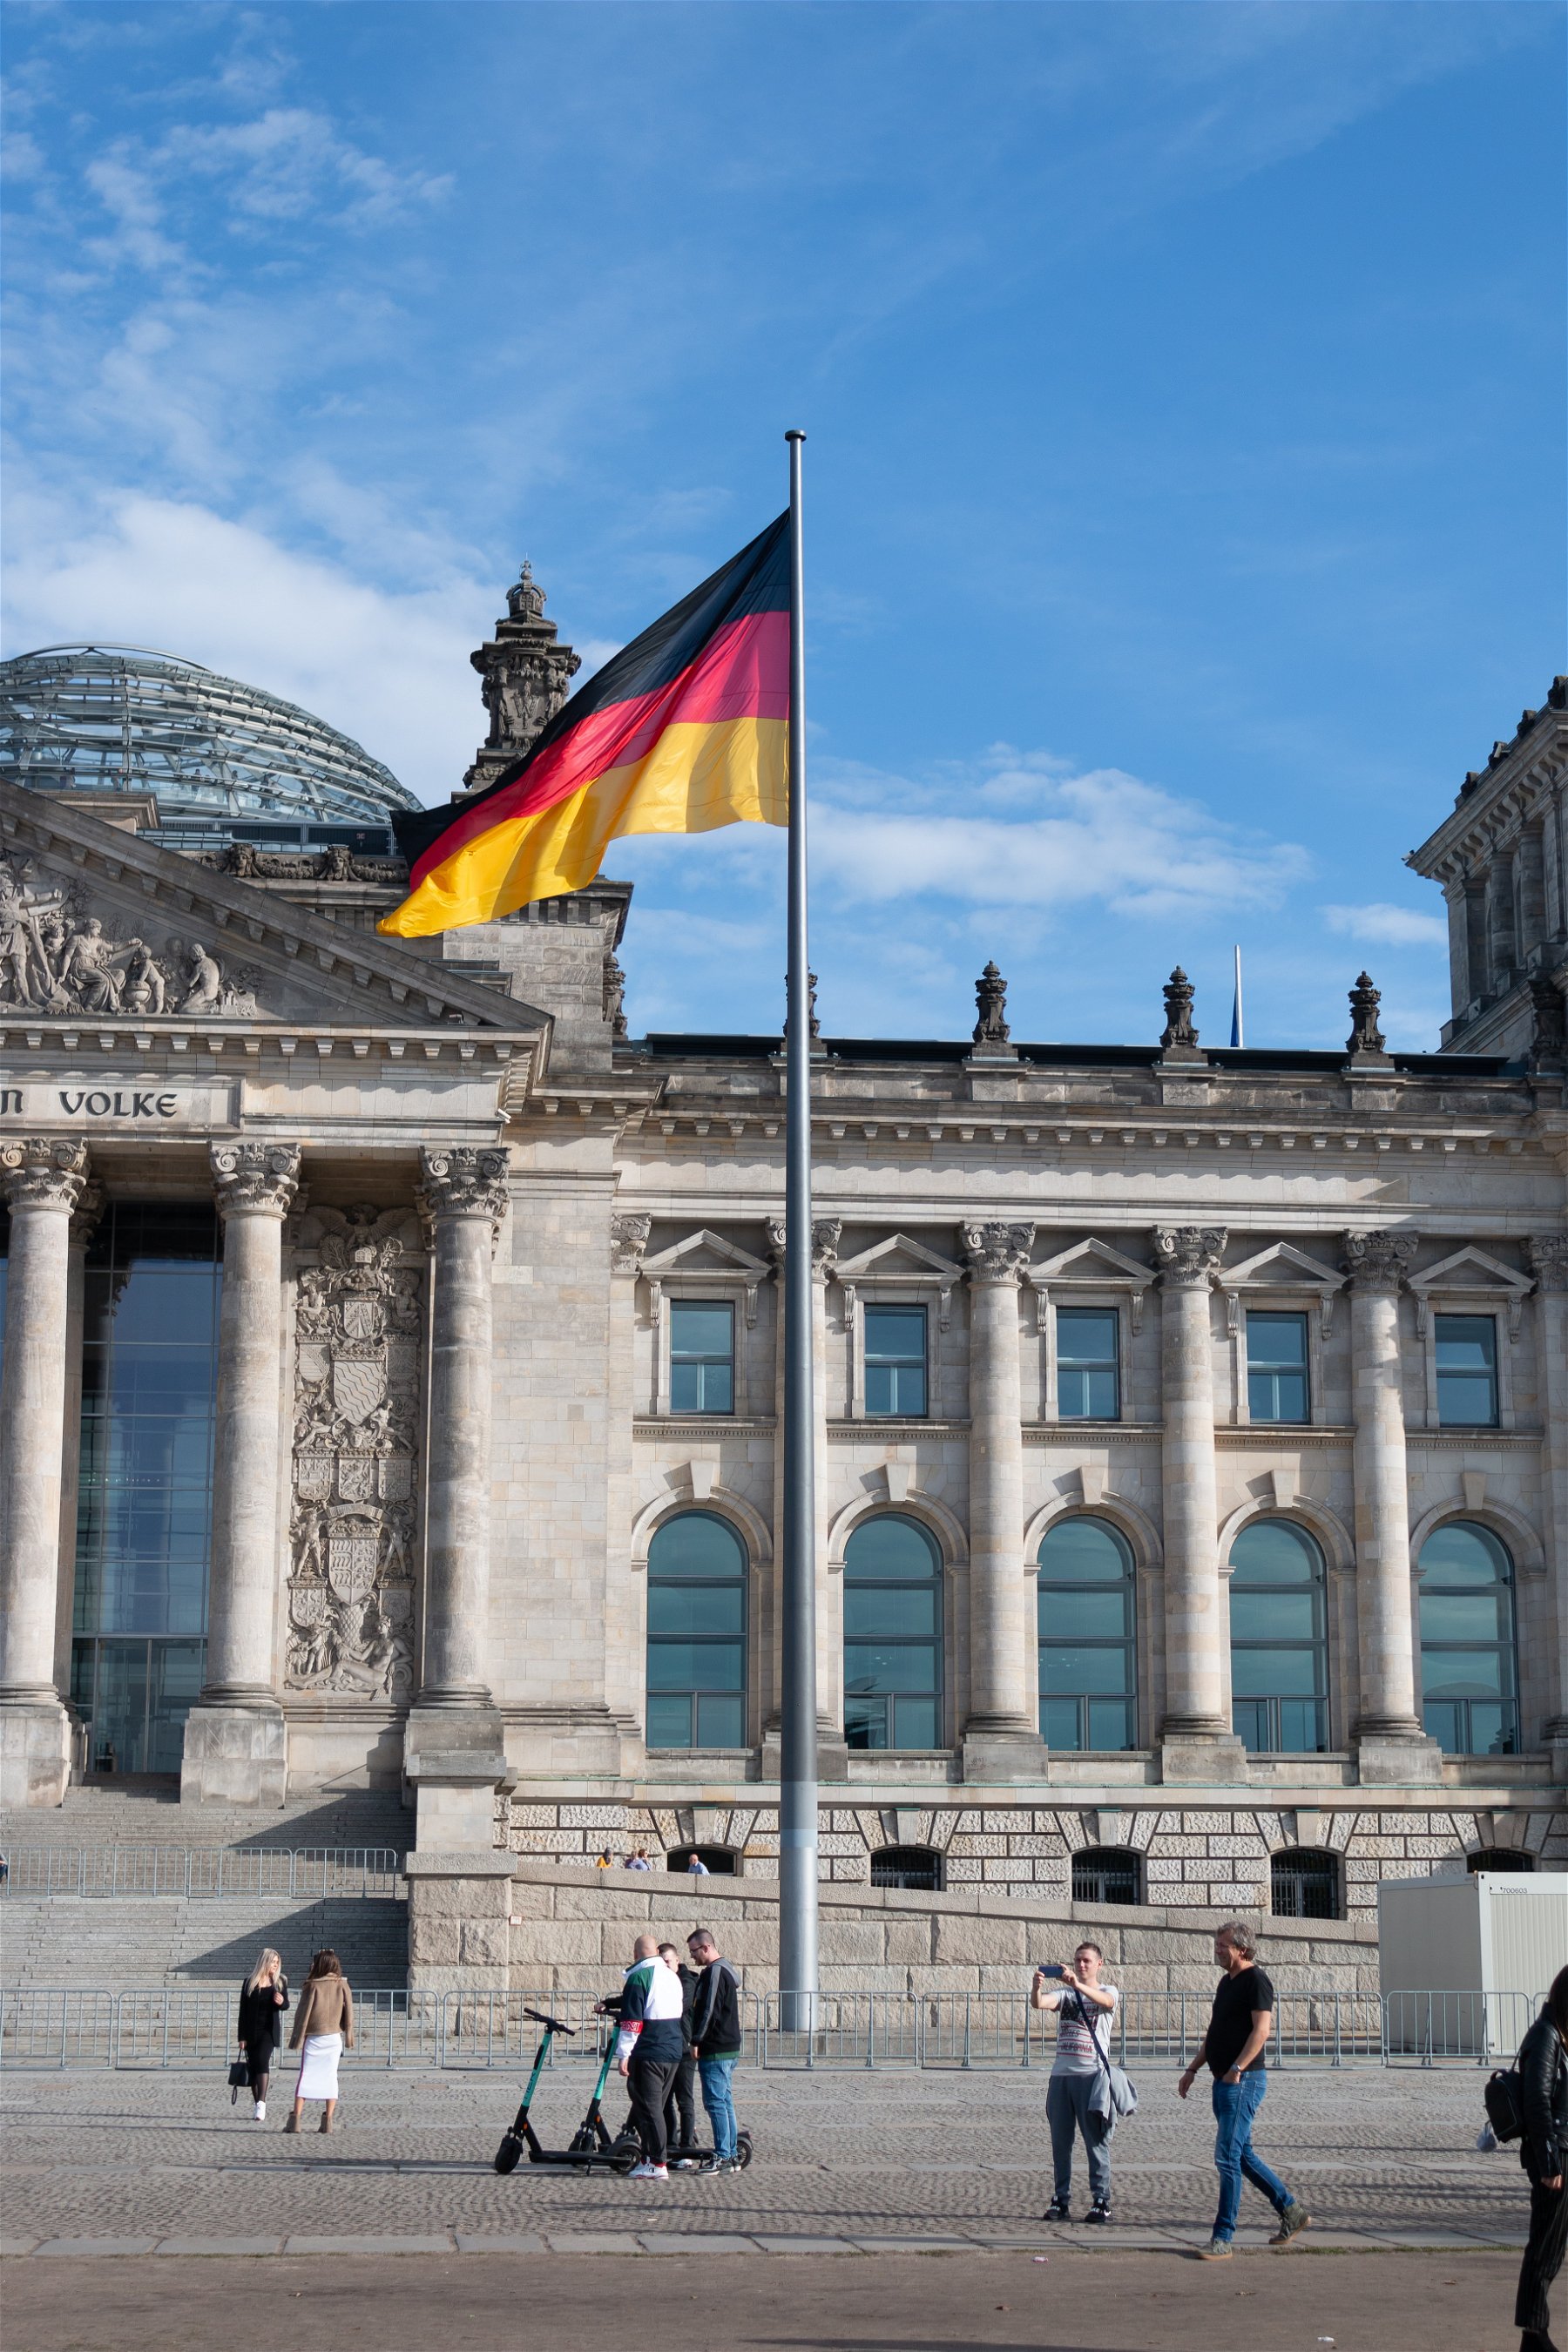 8 Important Things To Do After Reaching Germany